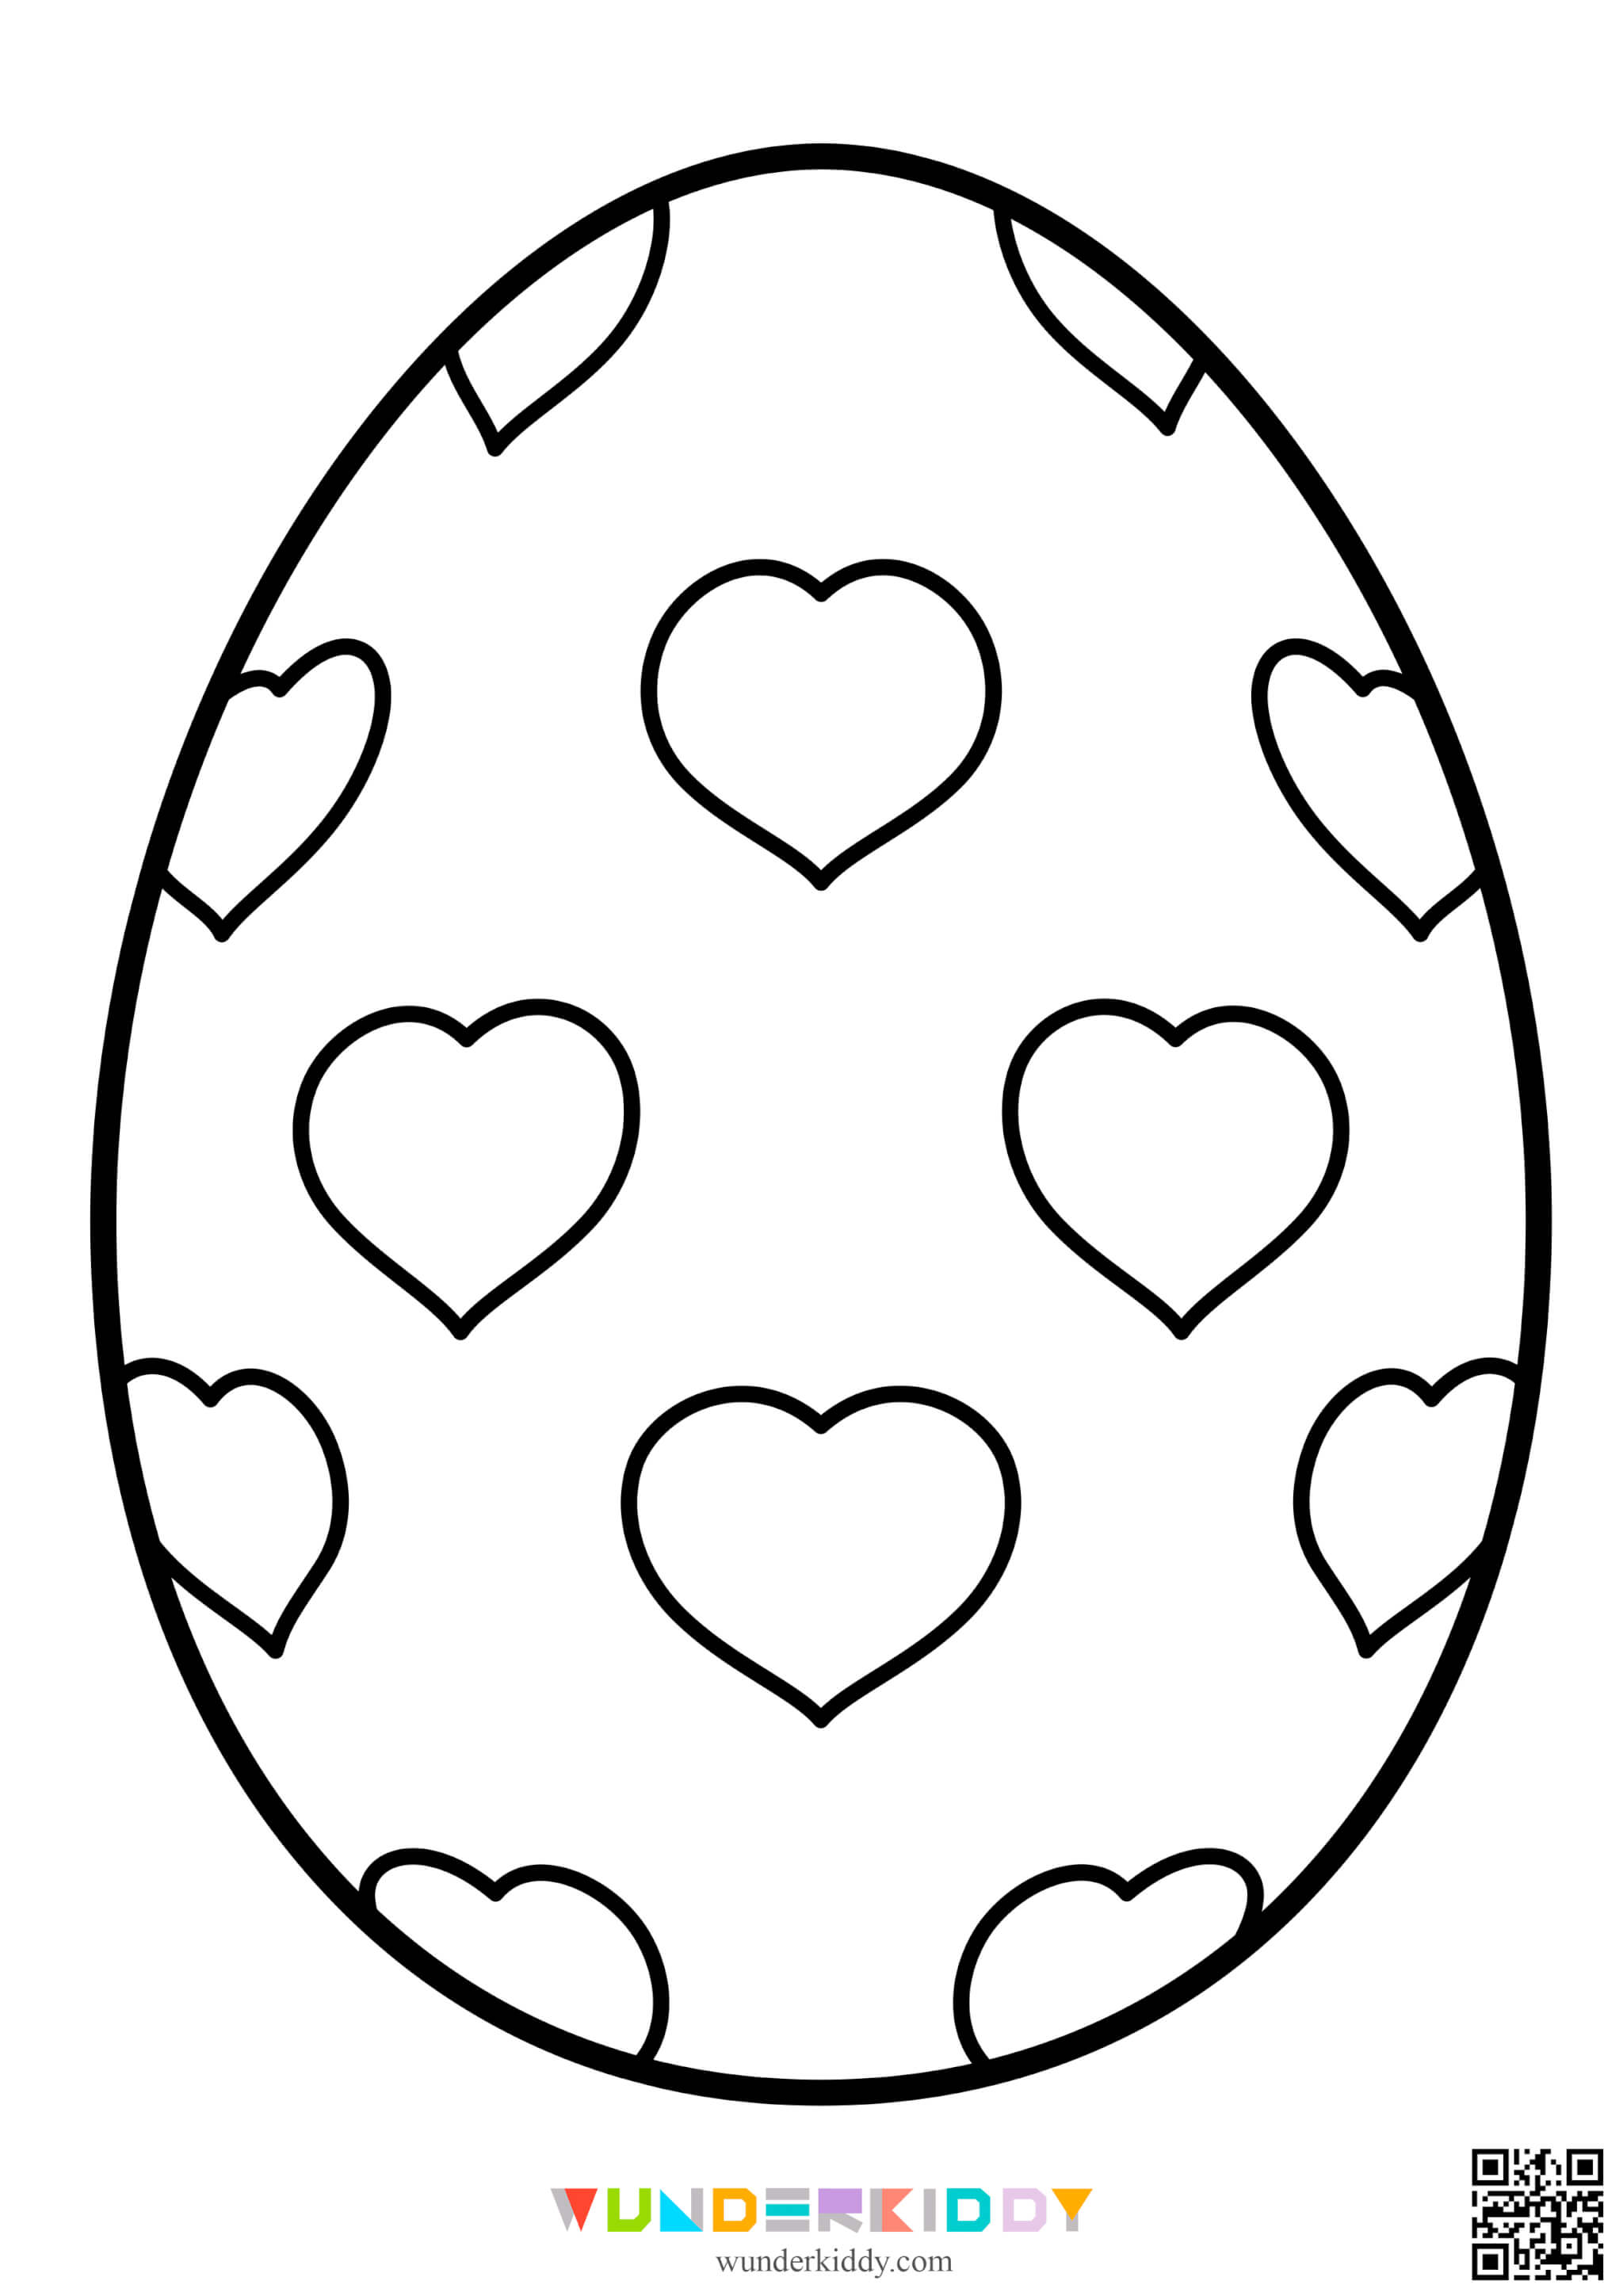 Large Easter Egg Coloring Page